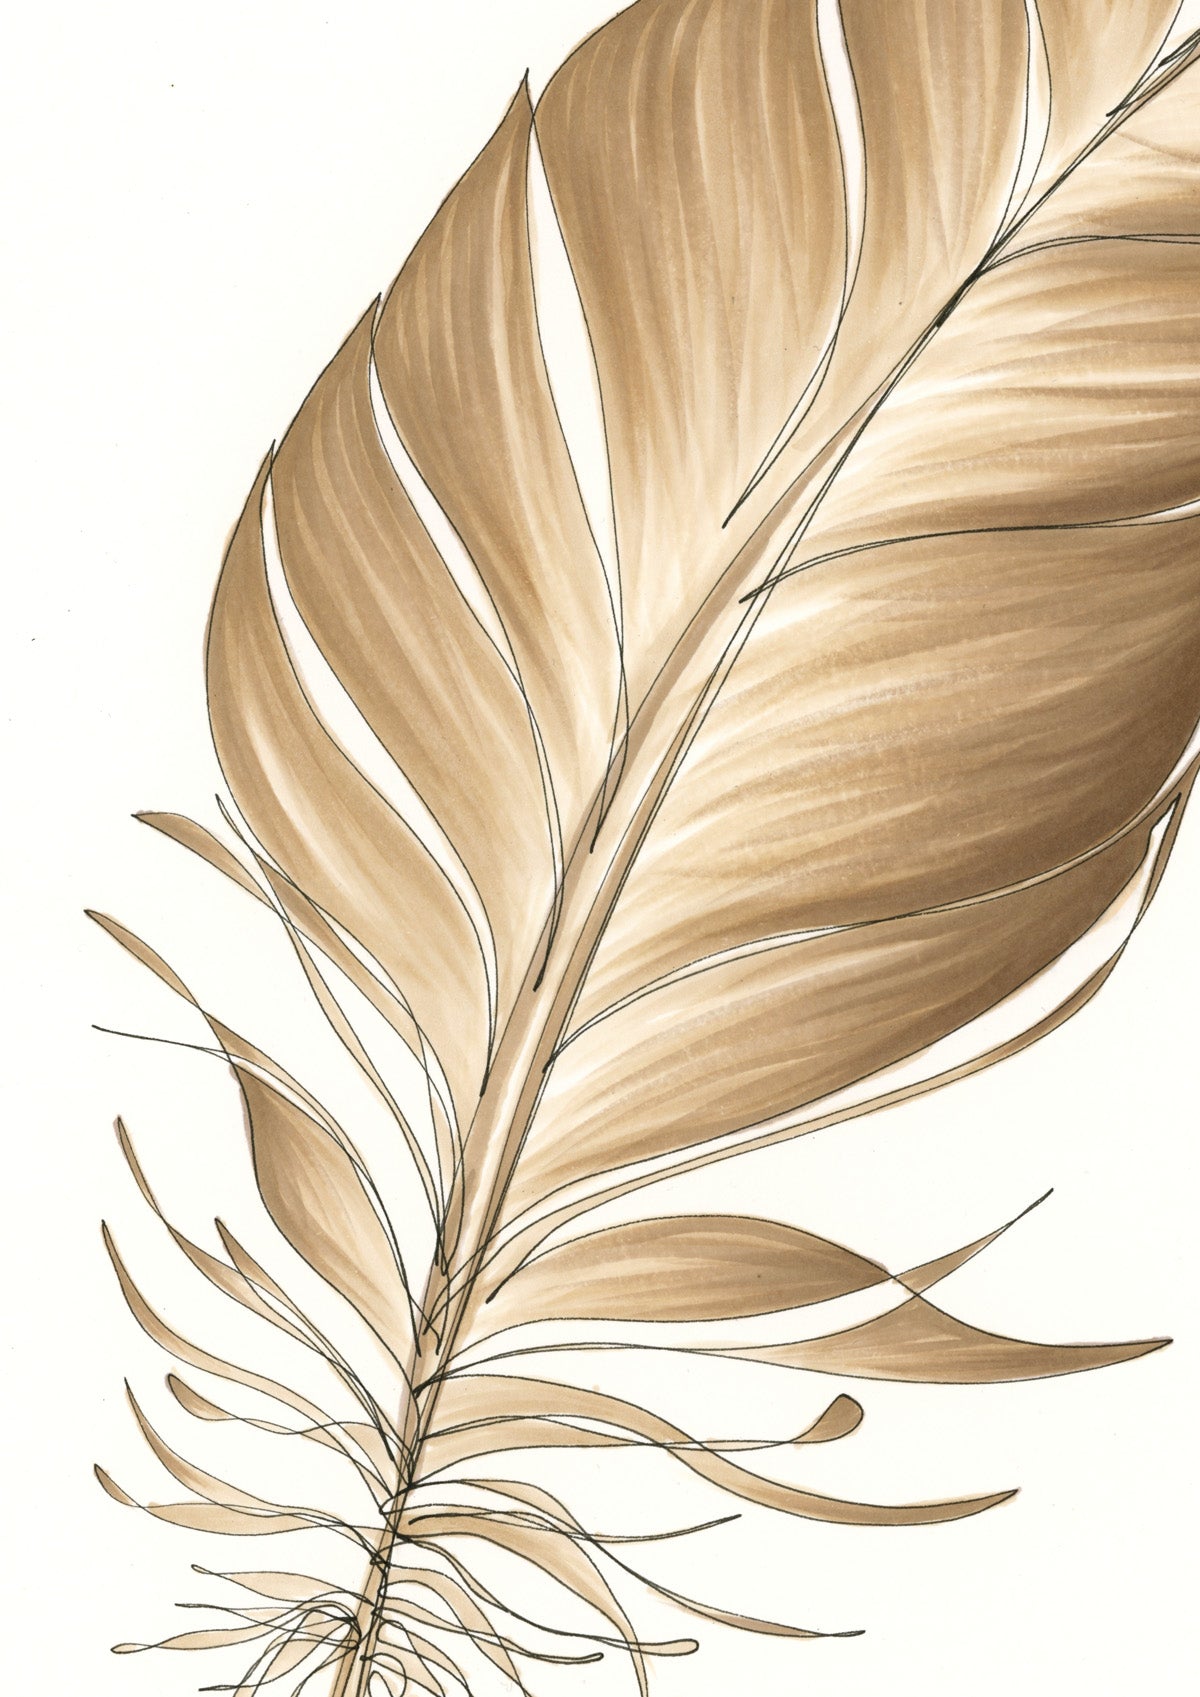 Feather Lines #9 - 12 x 16"